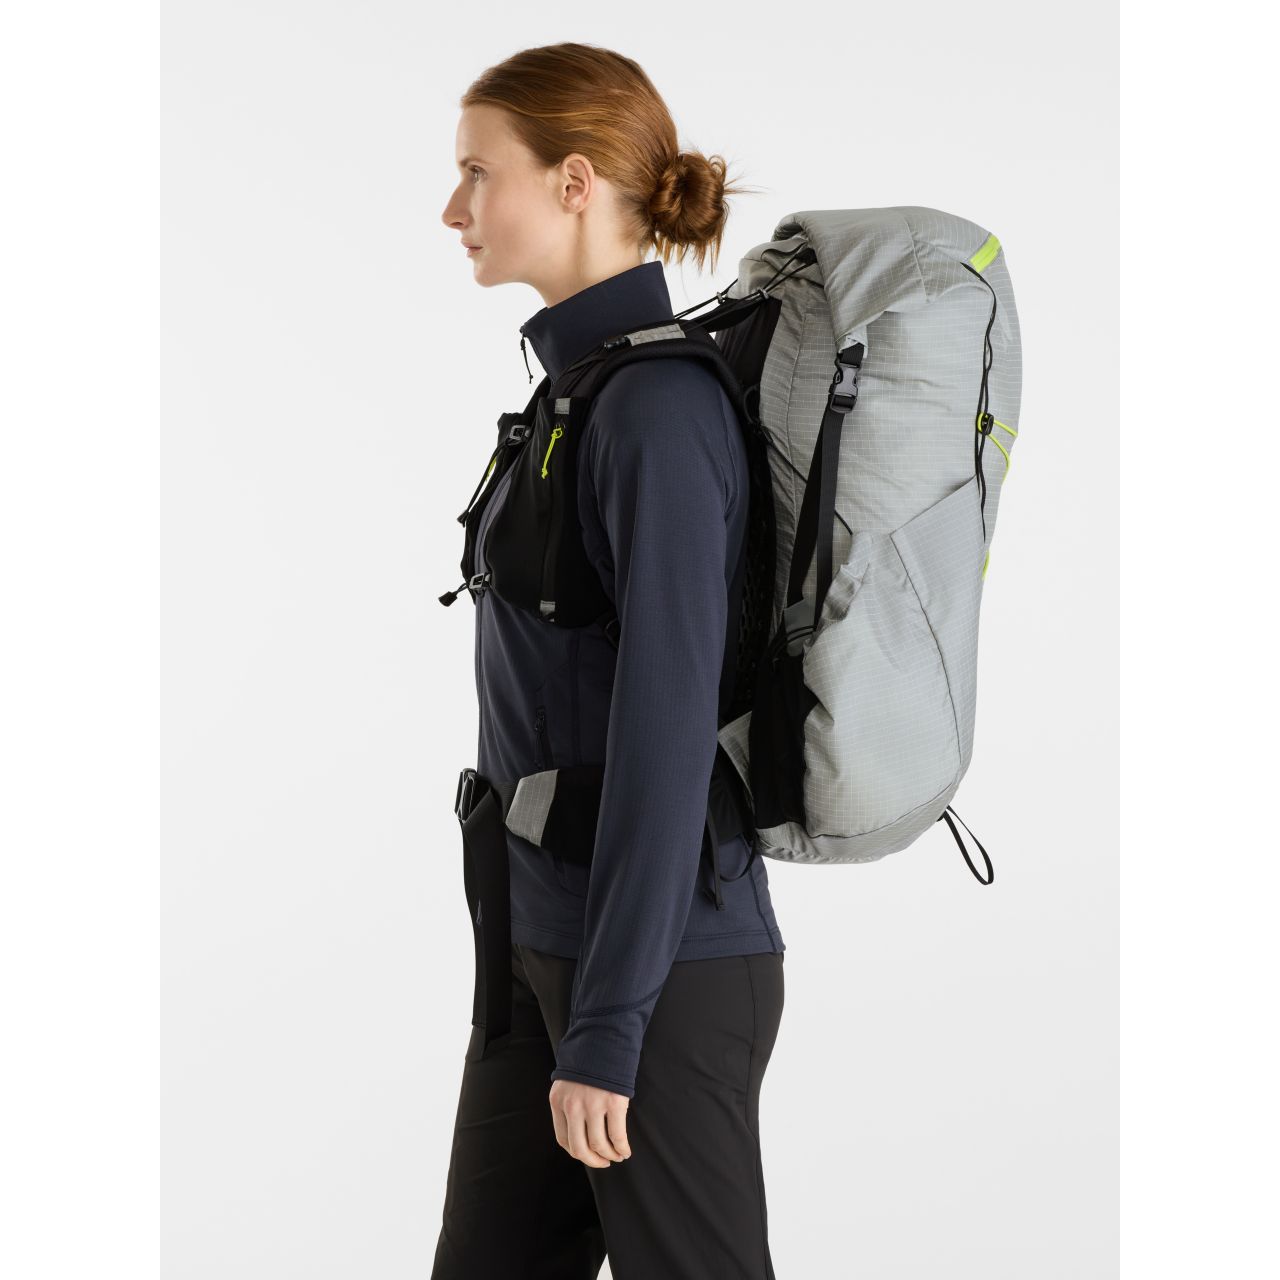  Arc'teryx Aerios 45 Backpack Women's, Versatile Pack for  Overnight and Multi-Day Trips, Pixel/Sprint, Regular